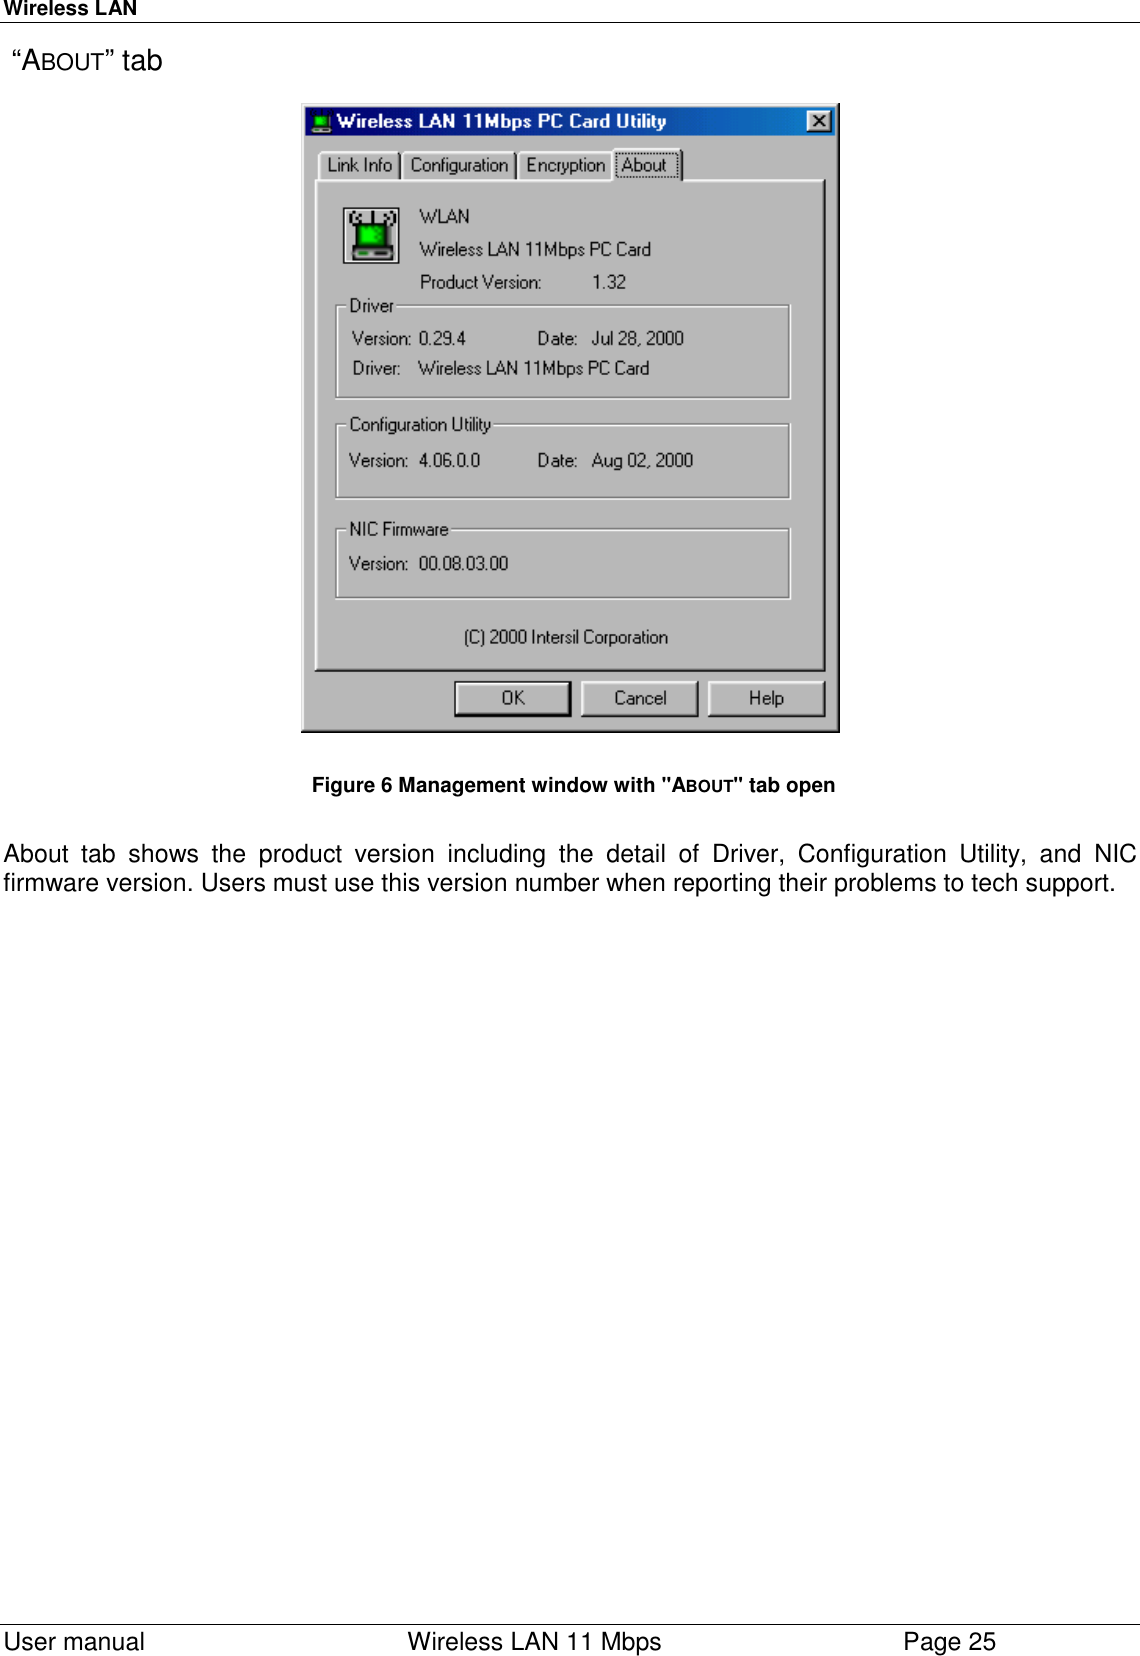 Wireless LAN  User manual    Wireless LAN 11 Mbps Page 25 “ABOUT” tabFigure 6 Management window with &quot;ABOUT&quot; tab openAbout tab shows the product version including the detail of Driver, Configuration Utility, and NICfirmware version. Users must use this version number when reporting their problems to tech support.